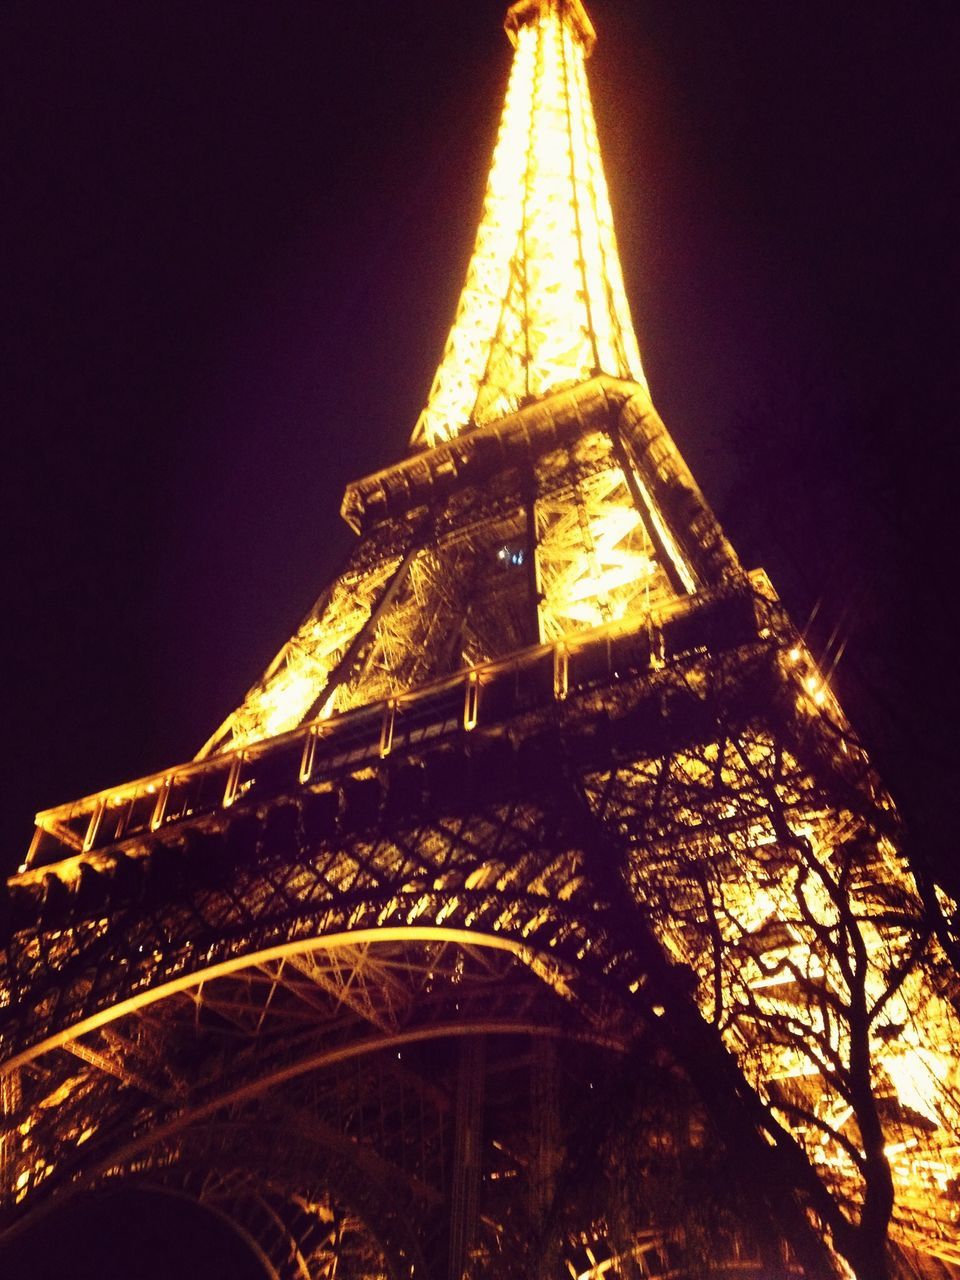 illuminated, night, low angle view, architecture, built structure, famous place, building exterior, international landmark, travel destinations, tower, tall - high, capital cities, tourism, travel, city, sky, eiffel tower, yellow, clear sky, no people